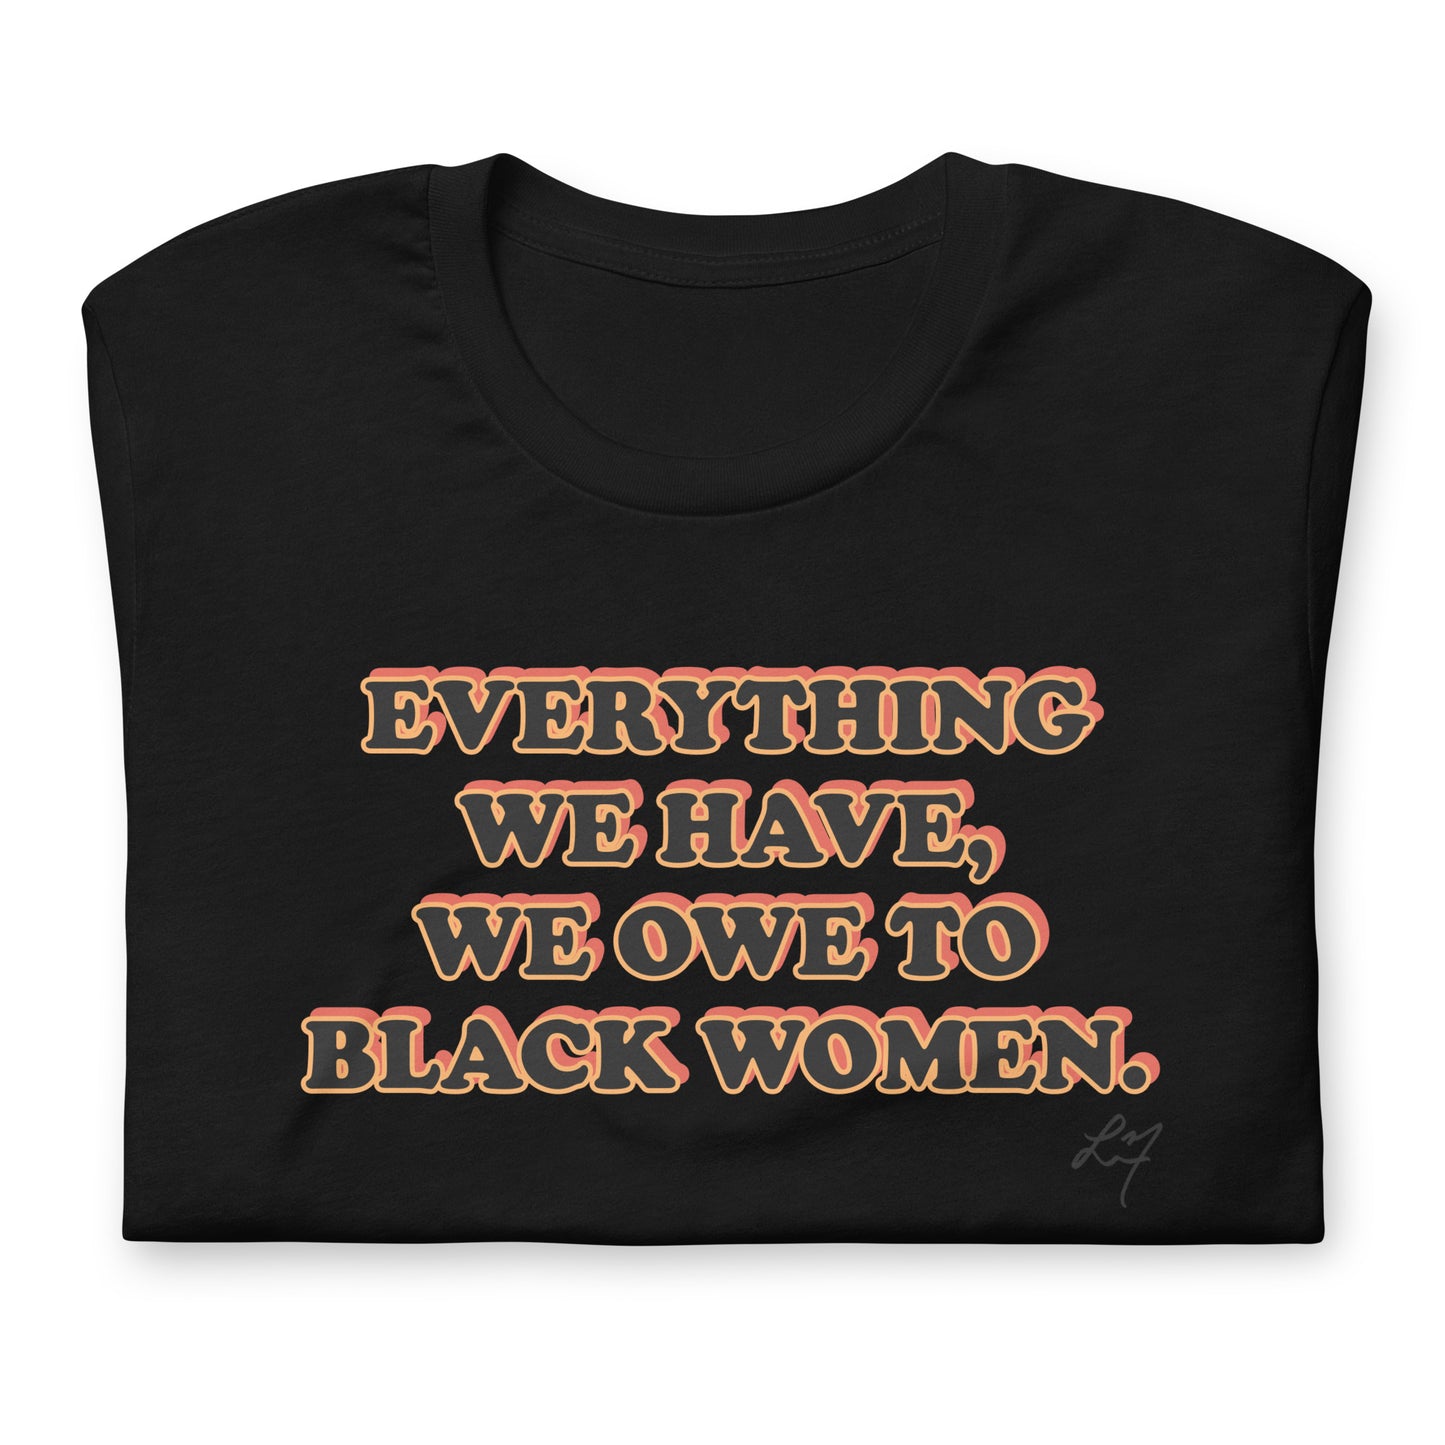 Everything We Have We Owe to Black Women T-Shirt